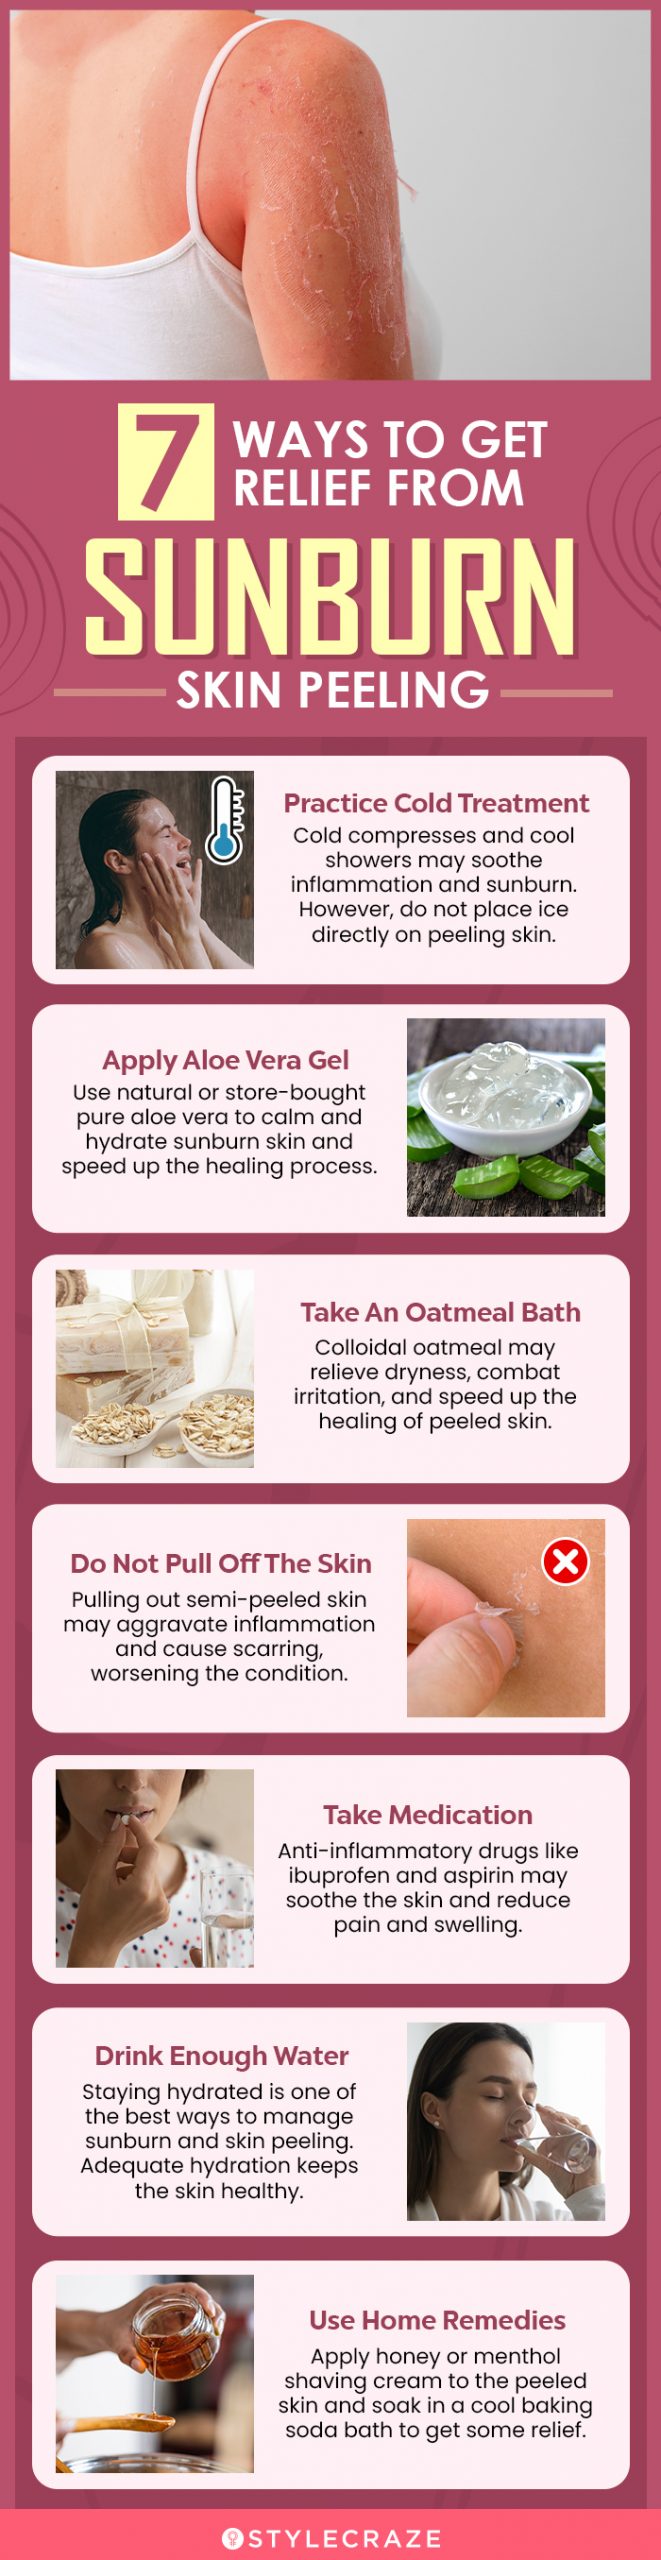 7 ways to get relief from sunburn skin peeling (infographic)